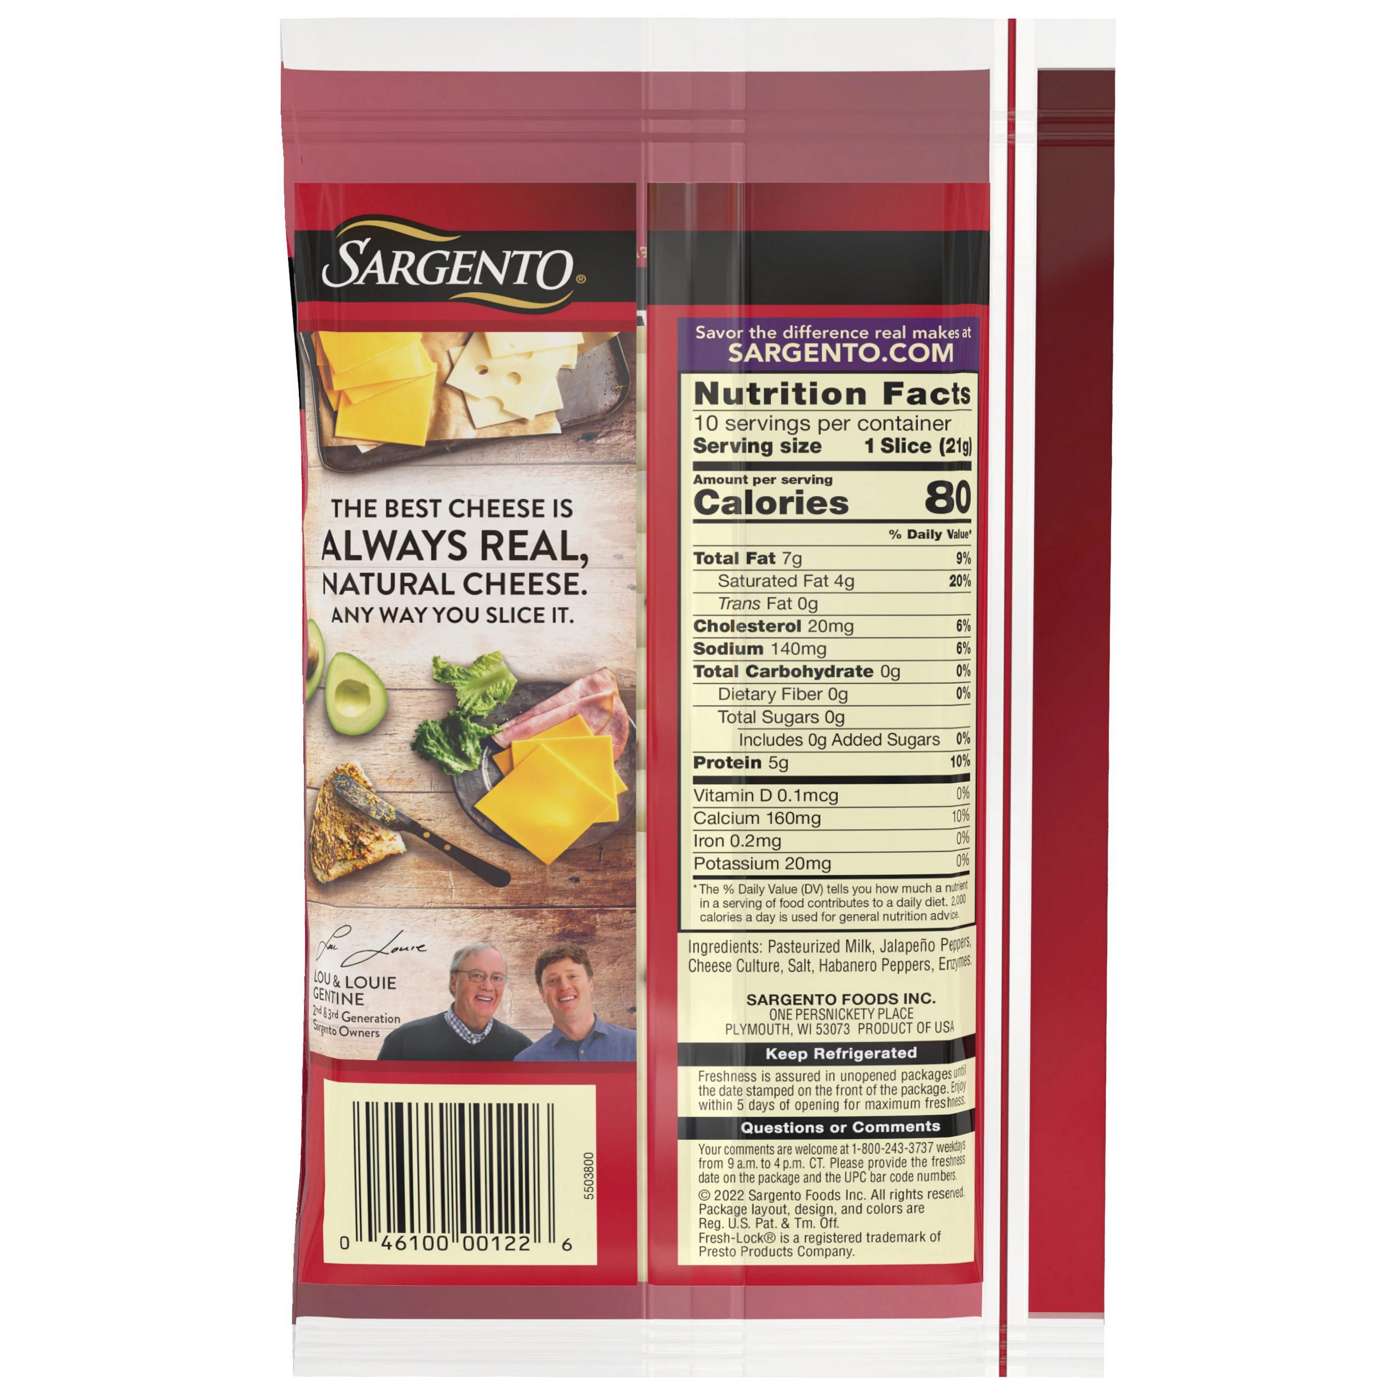 SARGENTO Pepper Jack Sliced Cheese; image 2 of 2